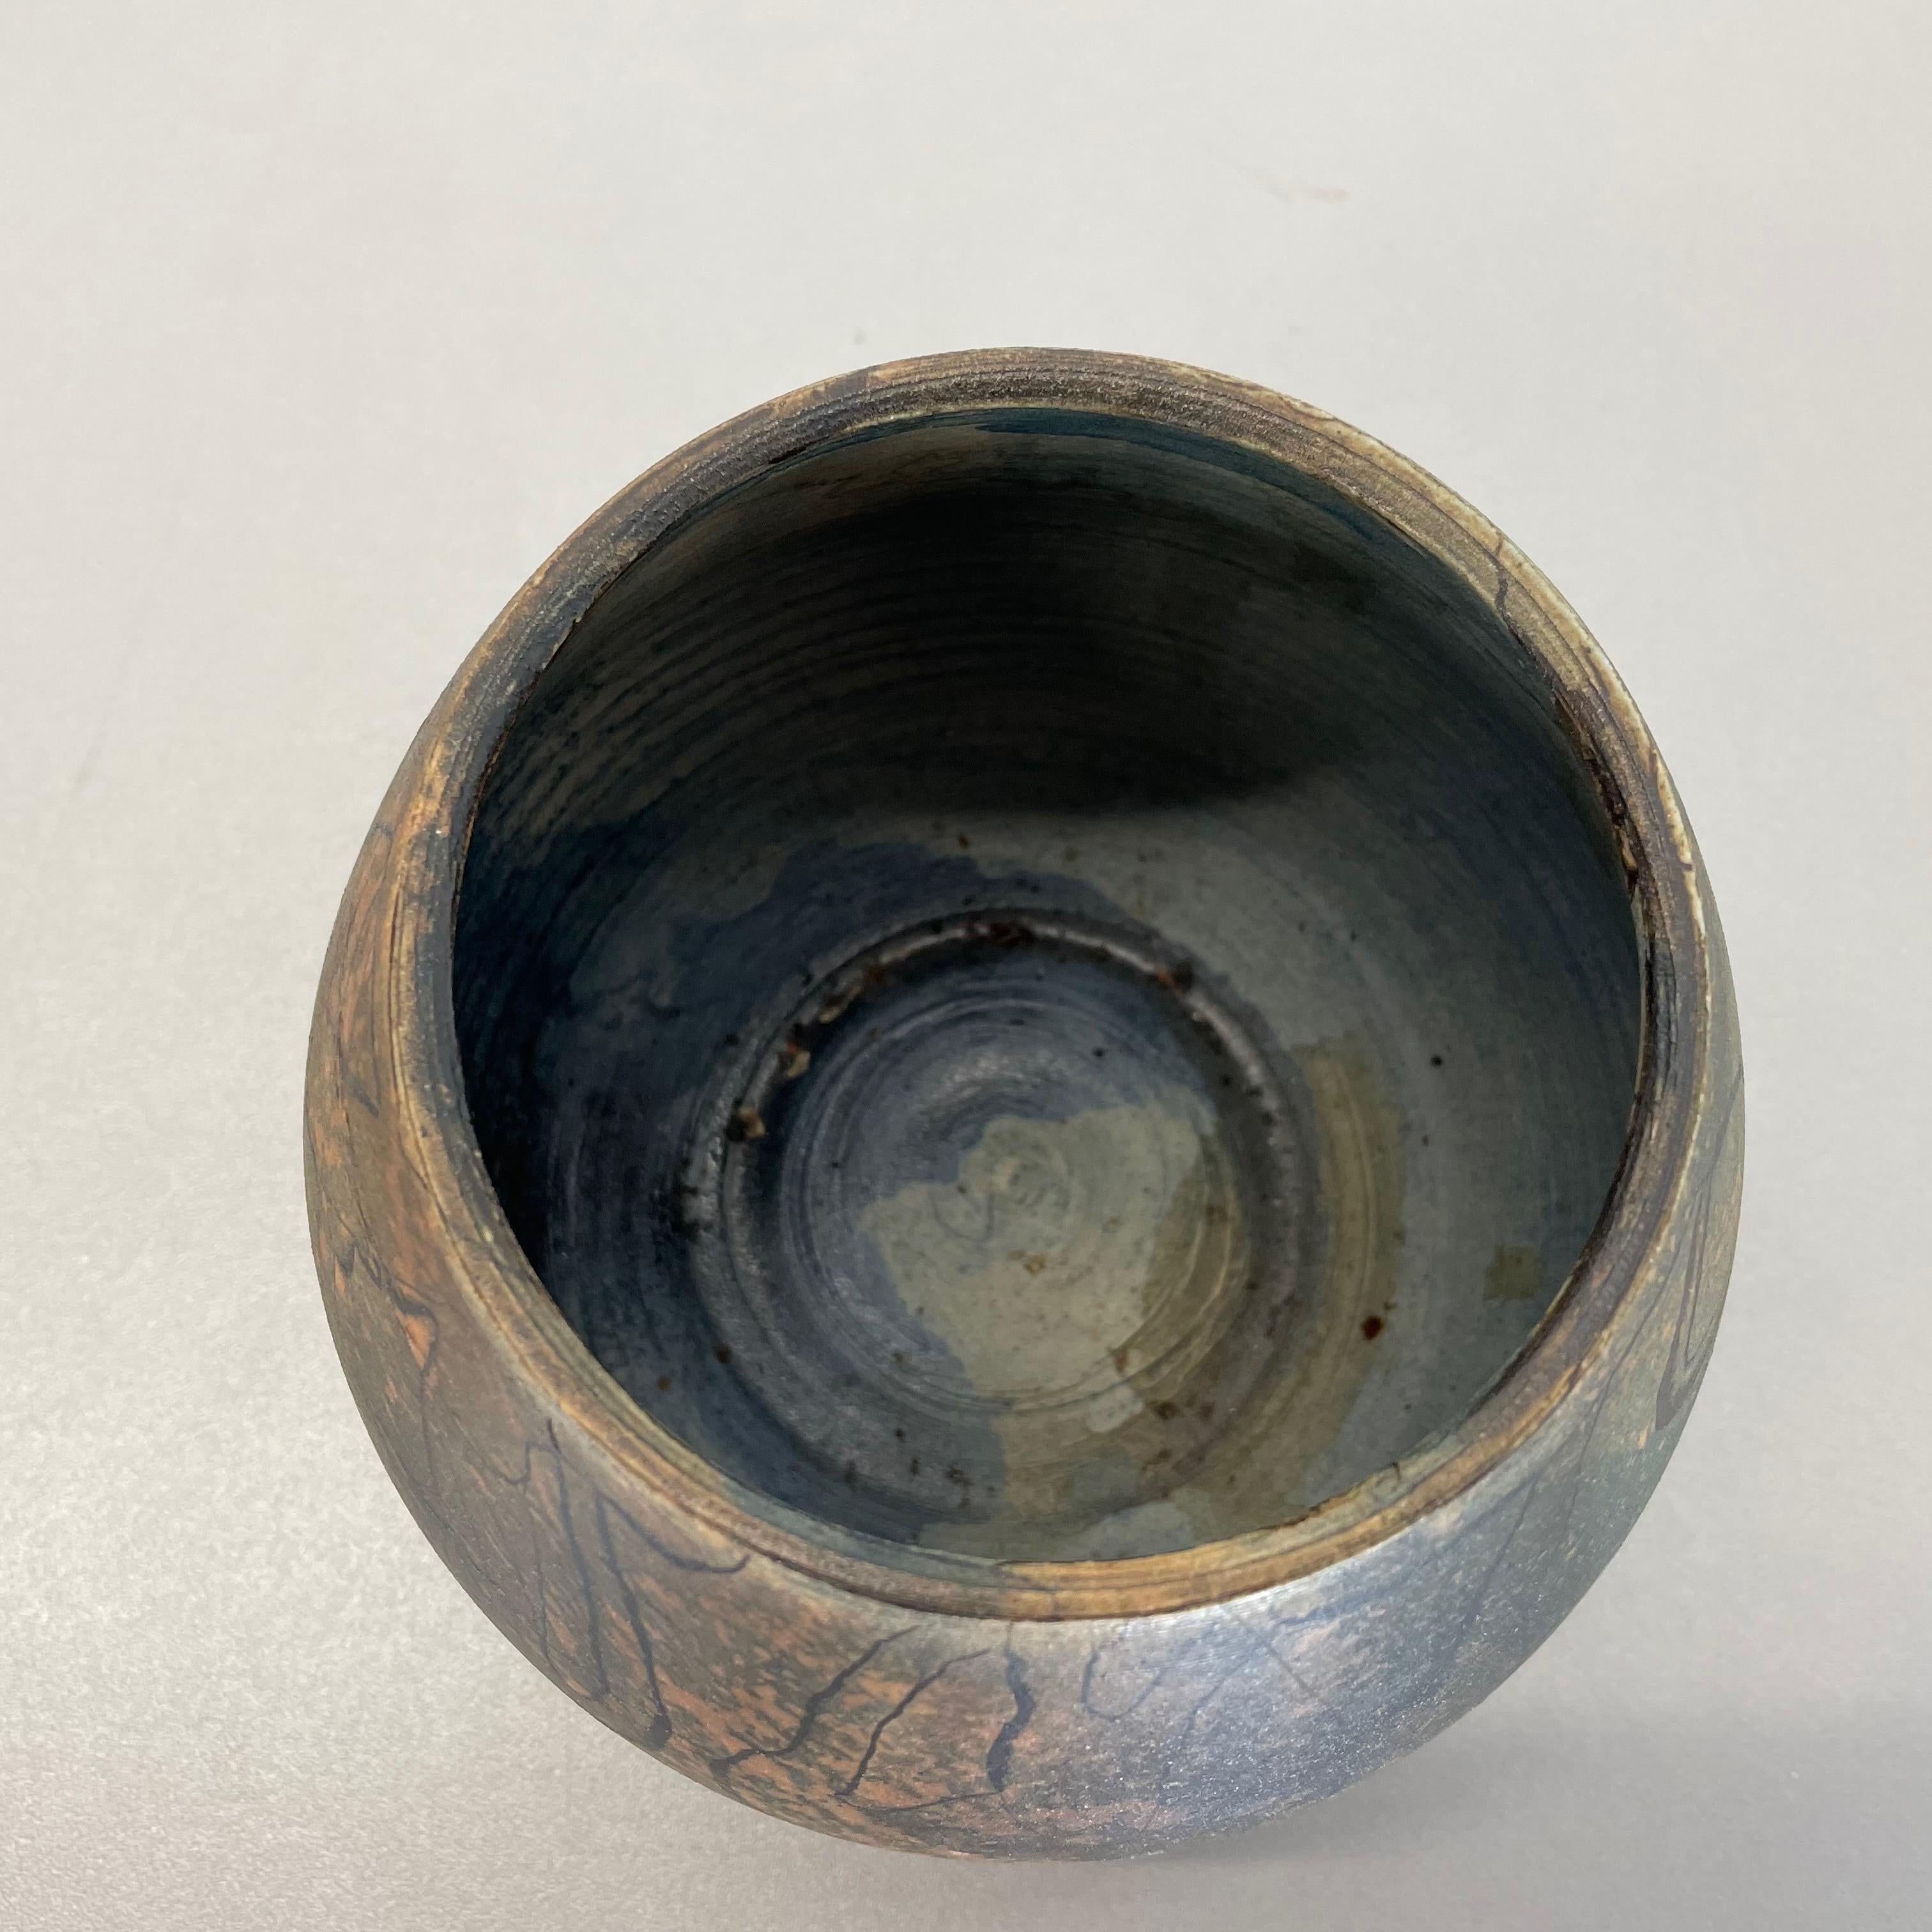 Abstract Ceramic Studio Pottery Object by Gerhard Liebenthron, Germany, 1970s For Sale 6